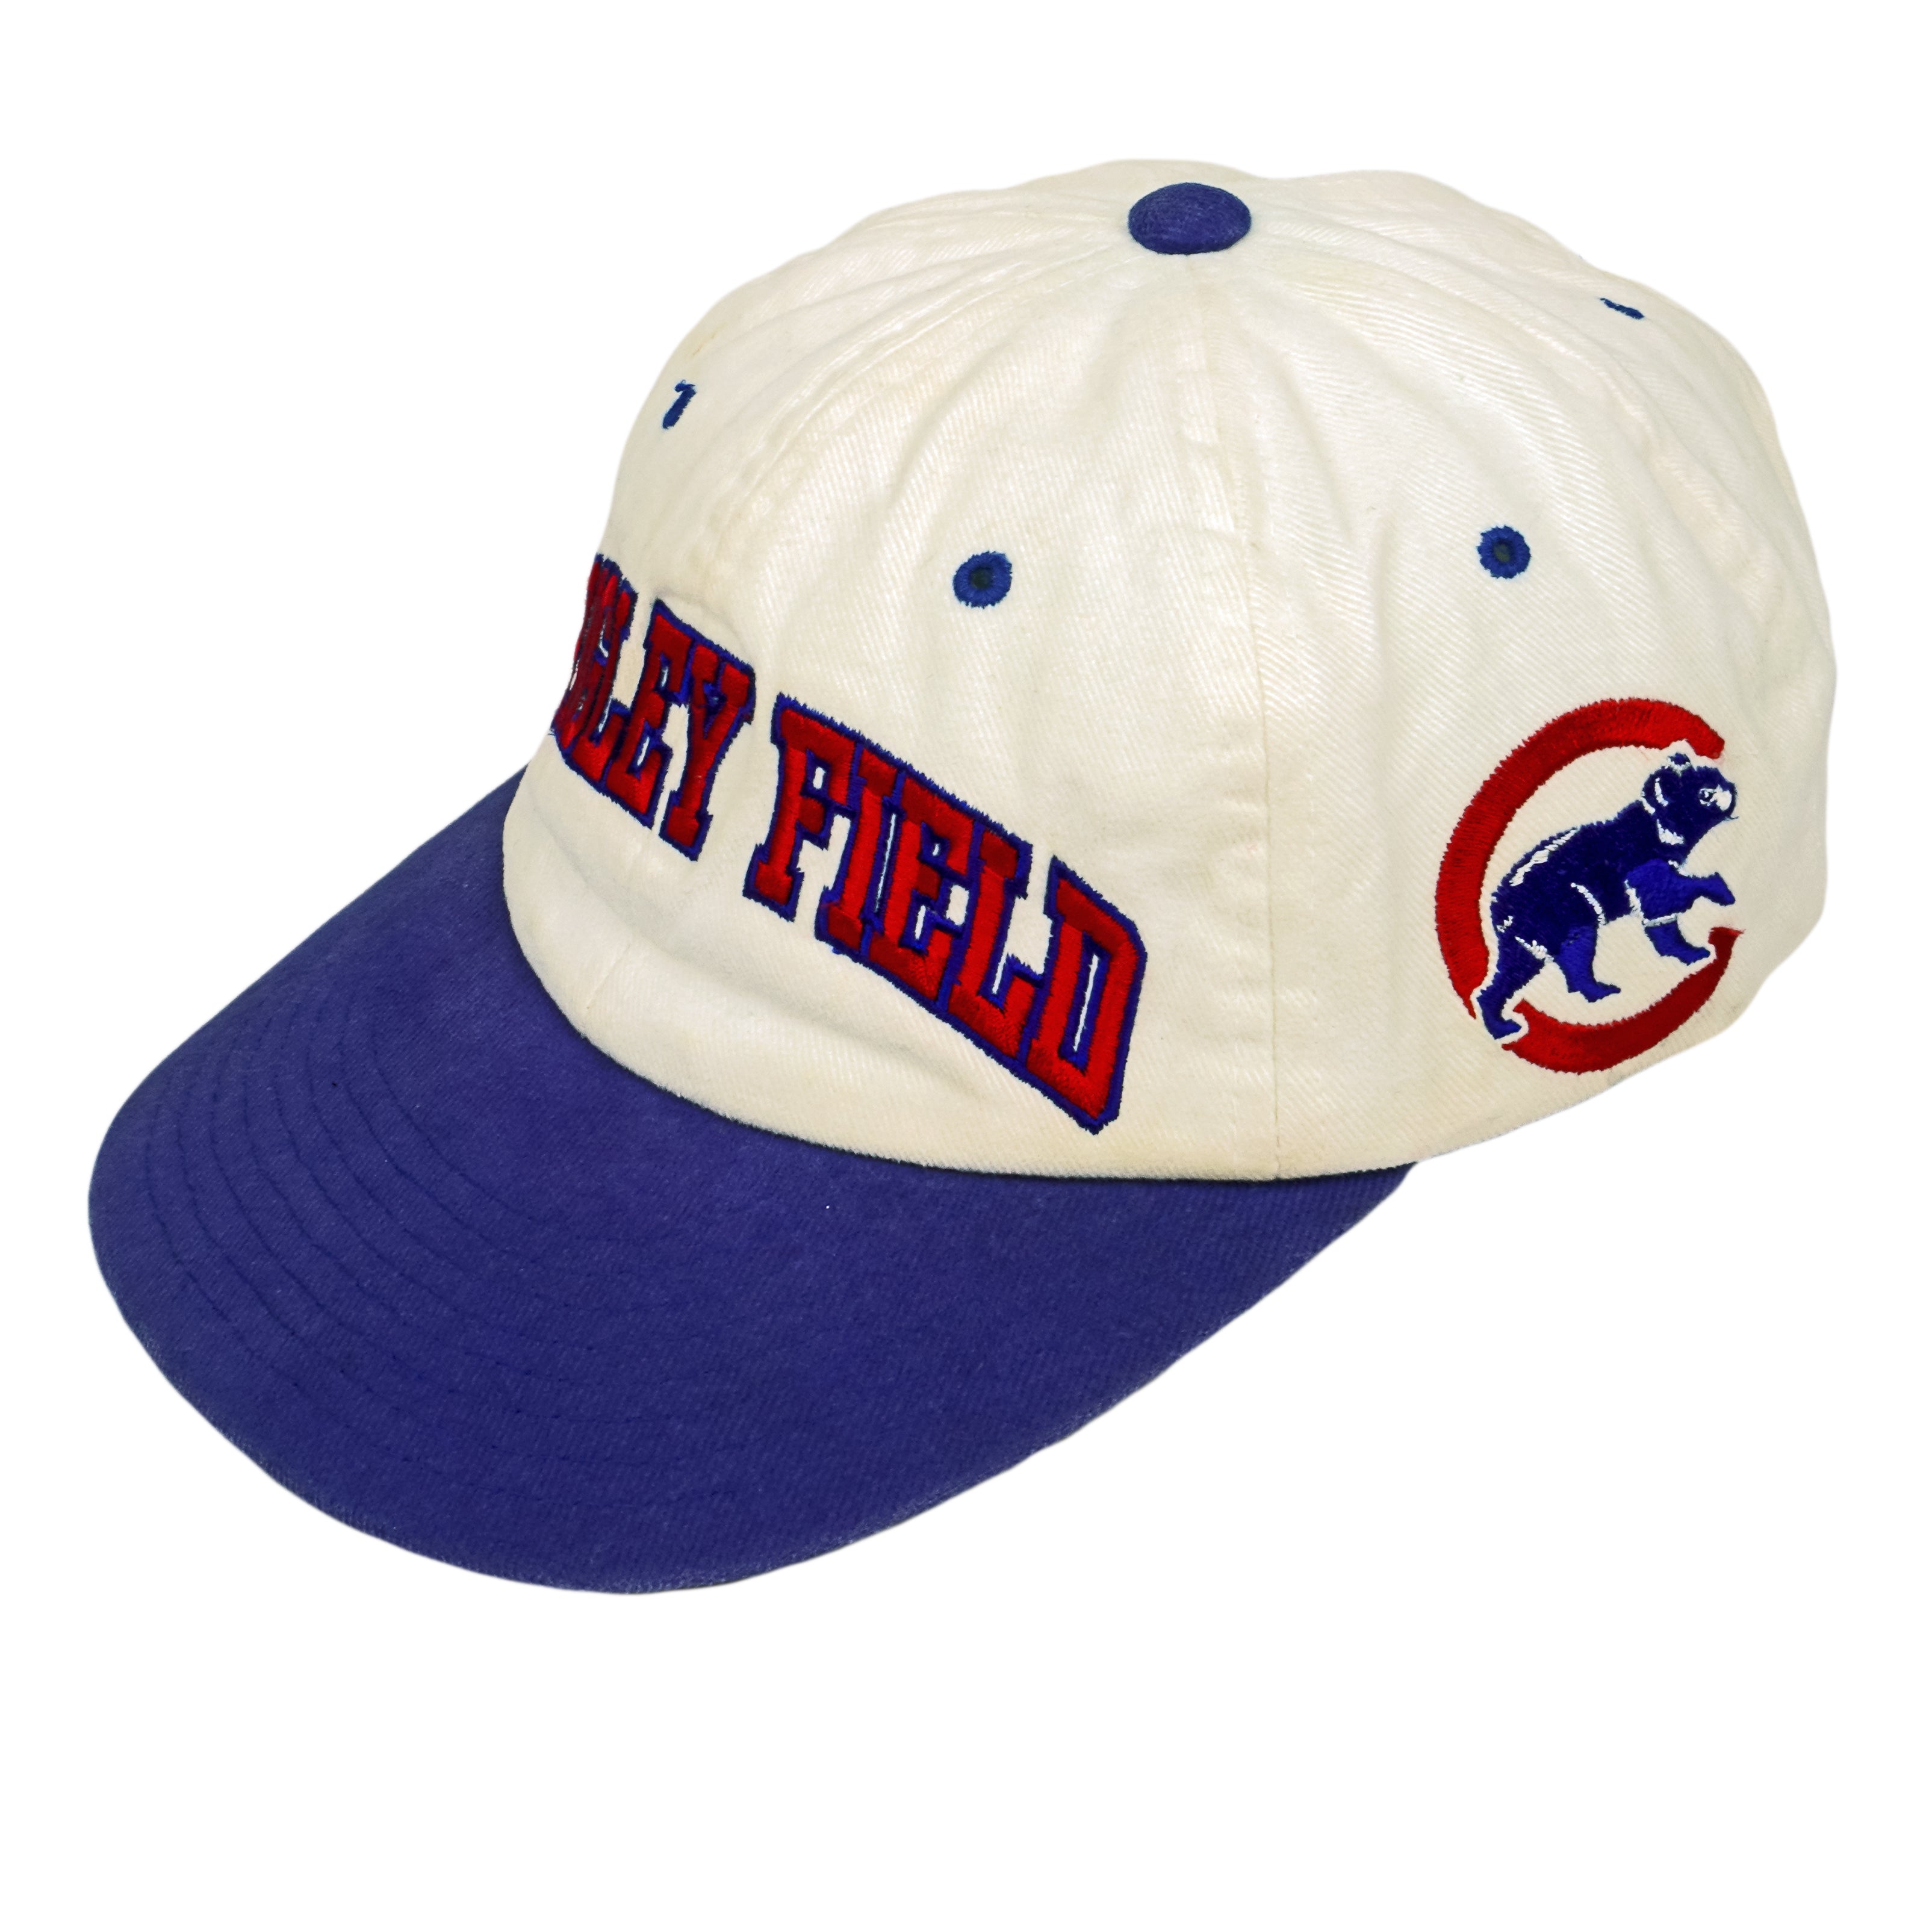 Vintage Starter - Chicago Cubs Wrigley Field Embroidered Snapback